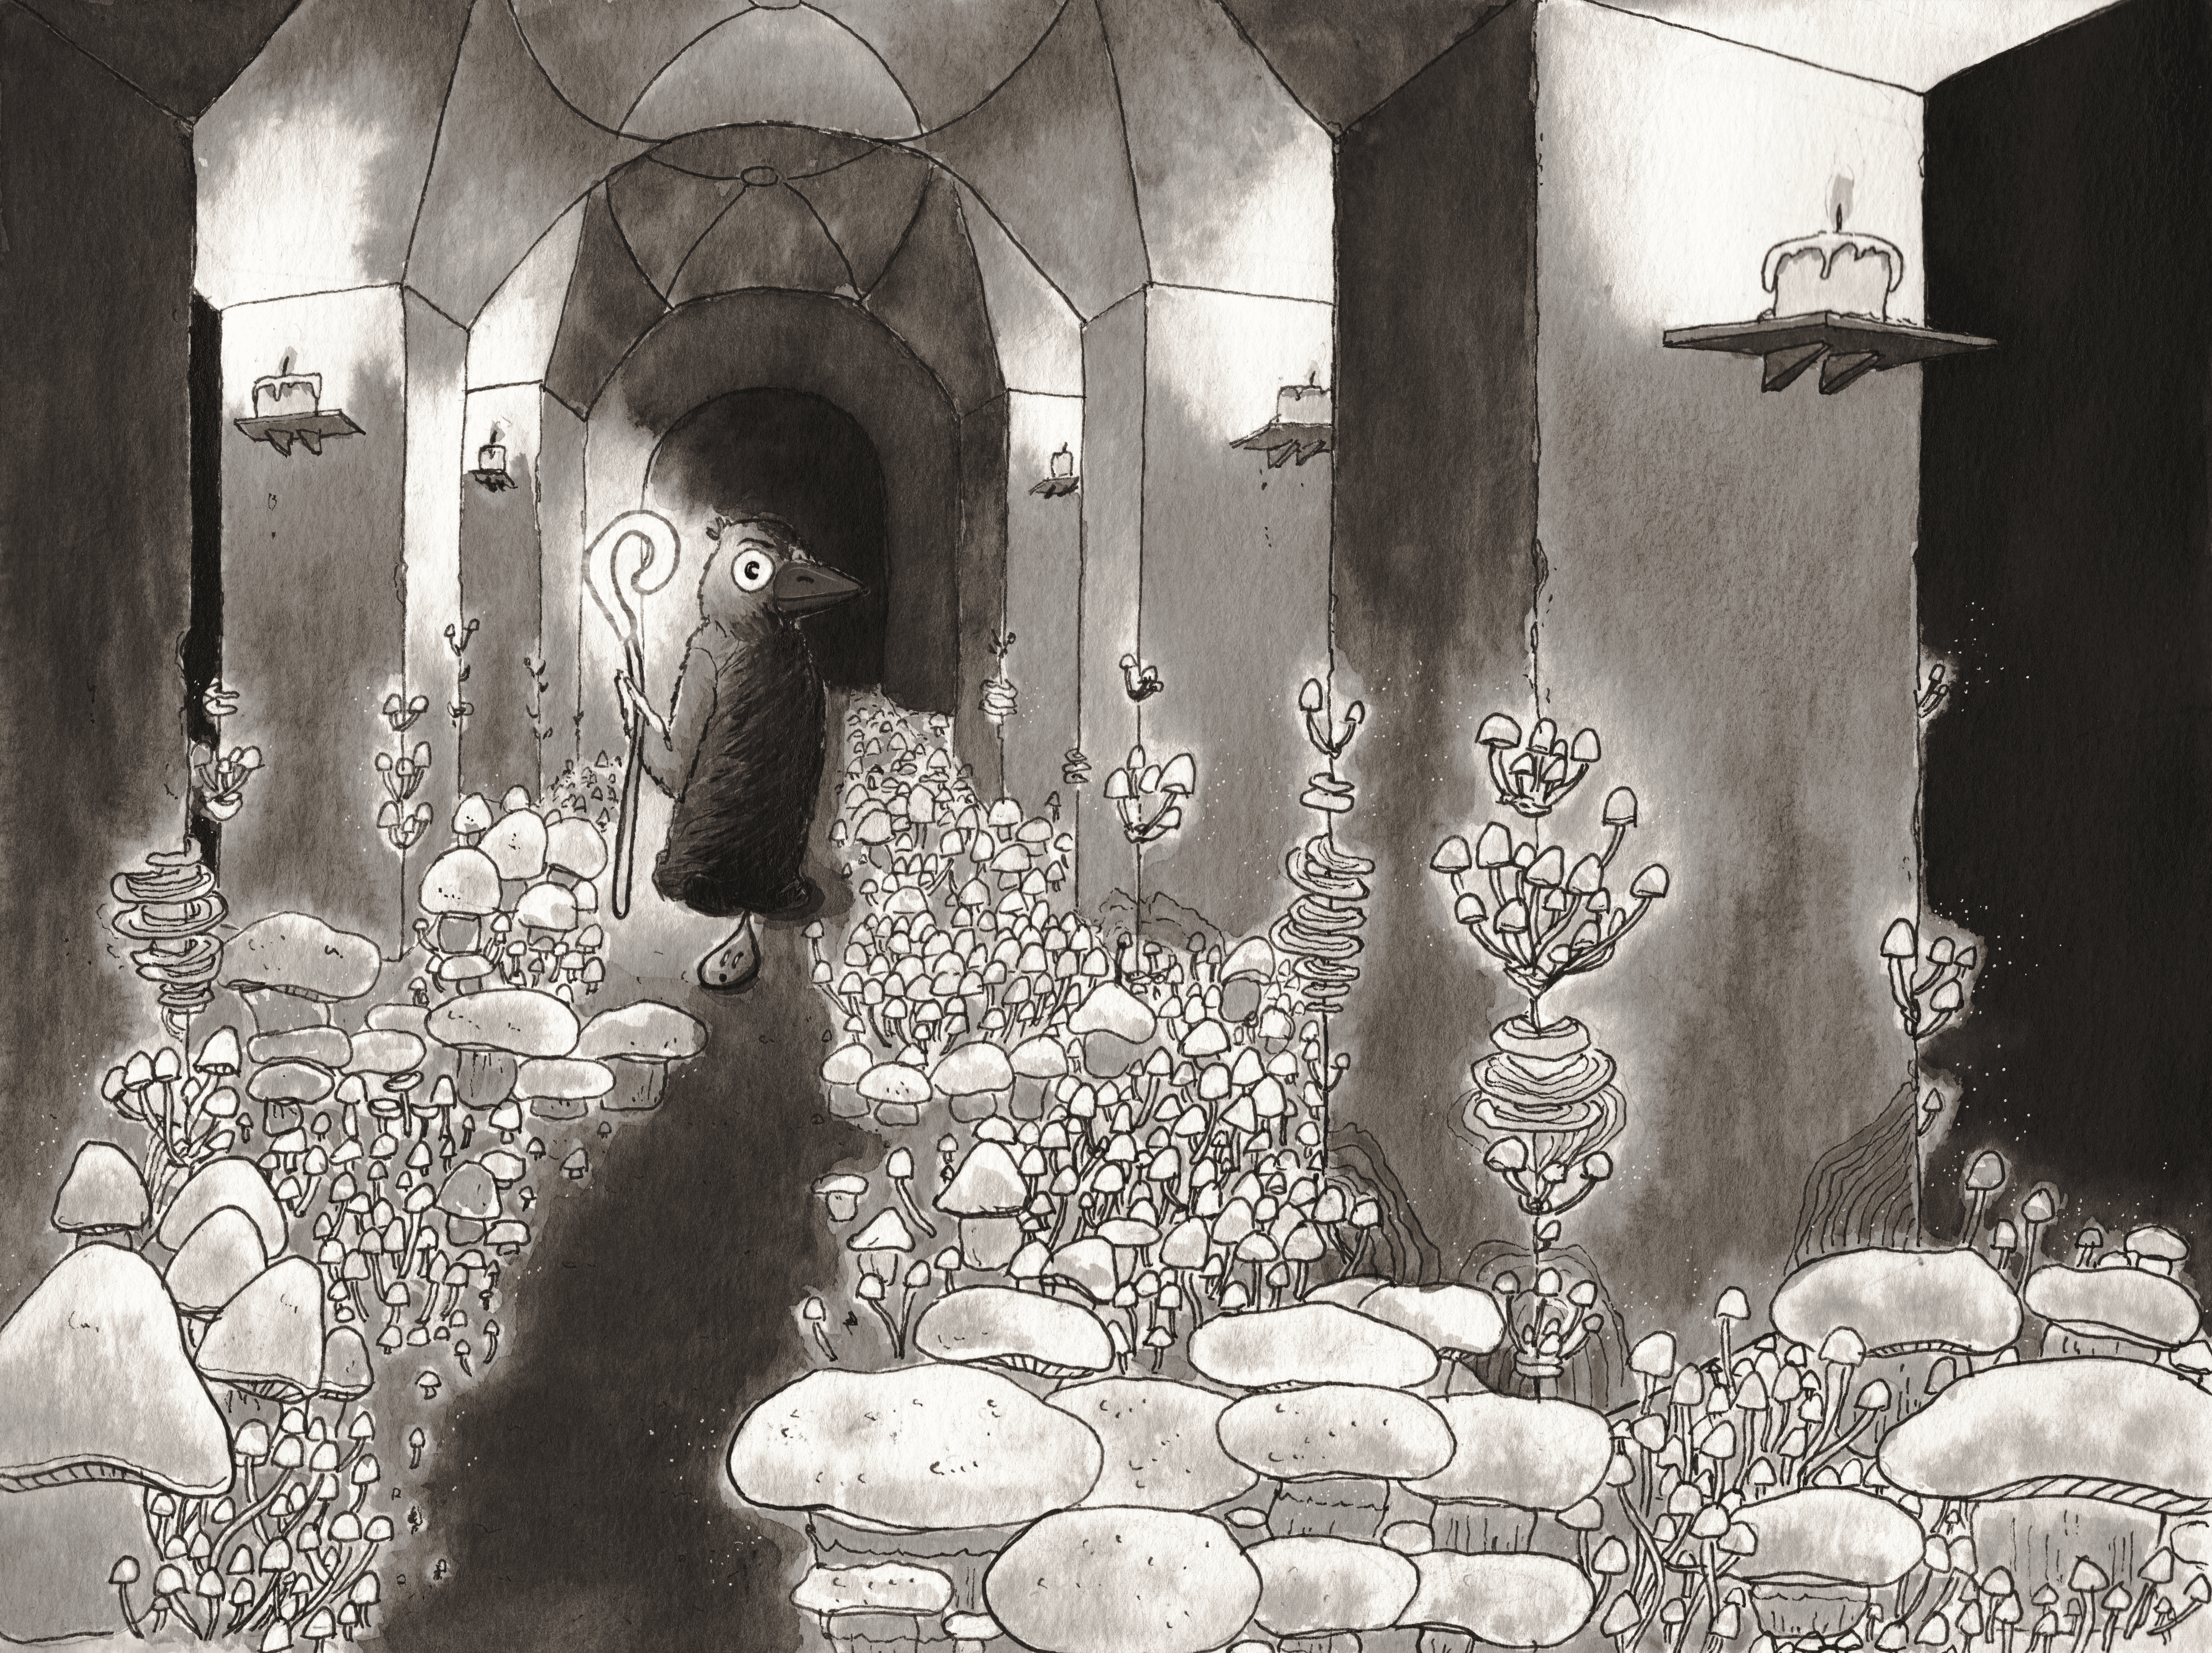 In the Cloister of the Wisps